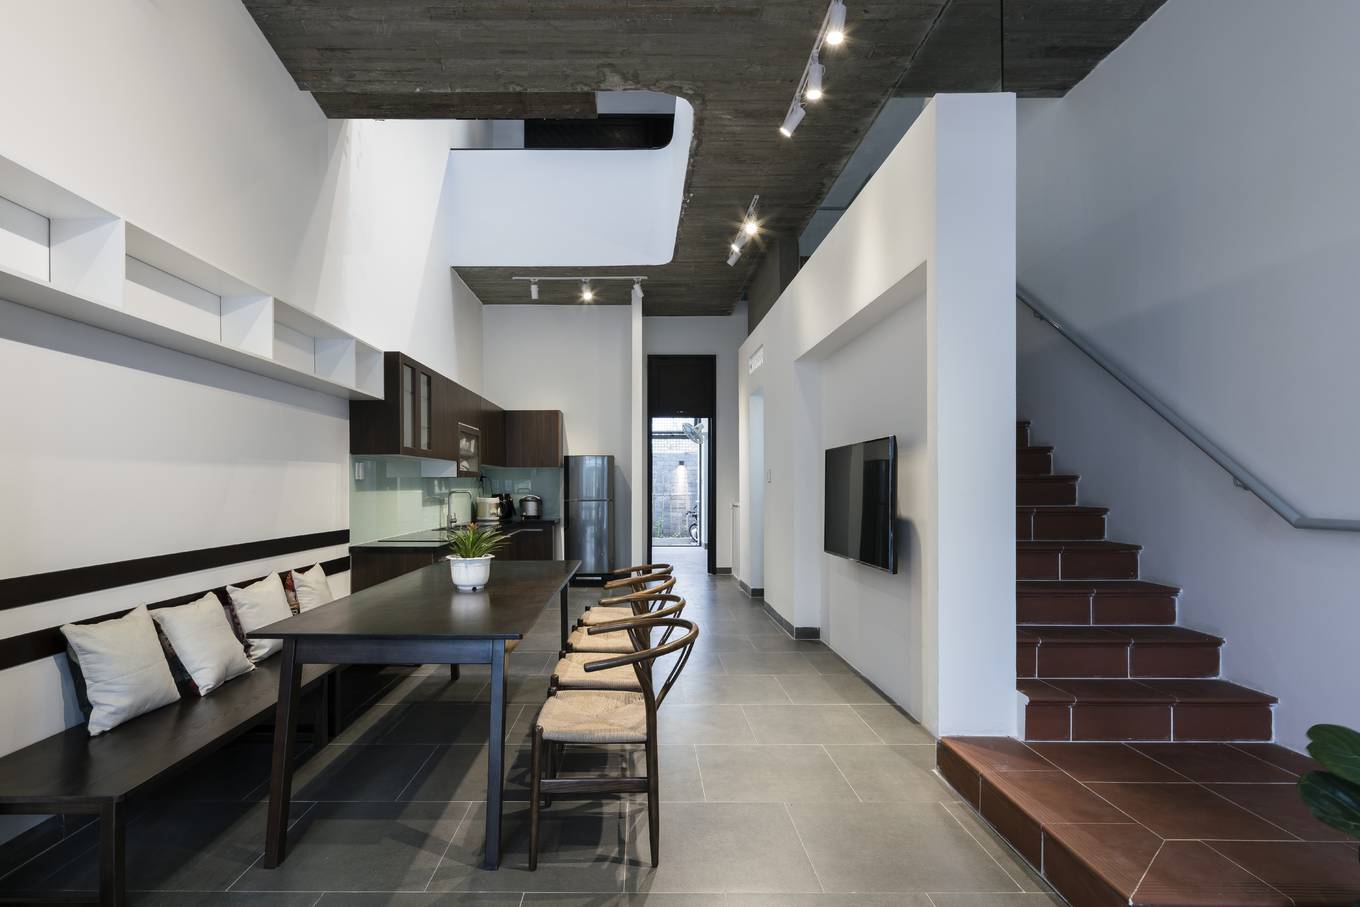 The house on the outskirts of Saigon has a minimalist style of Japanese people